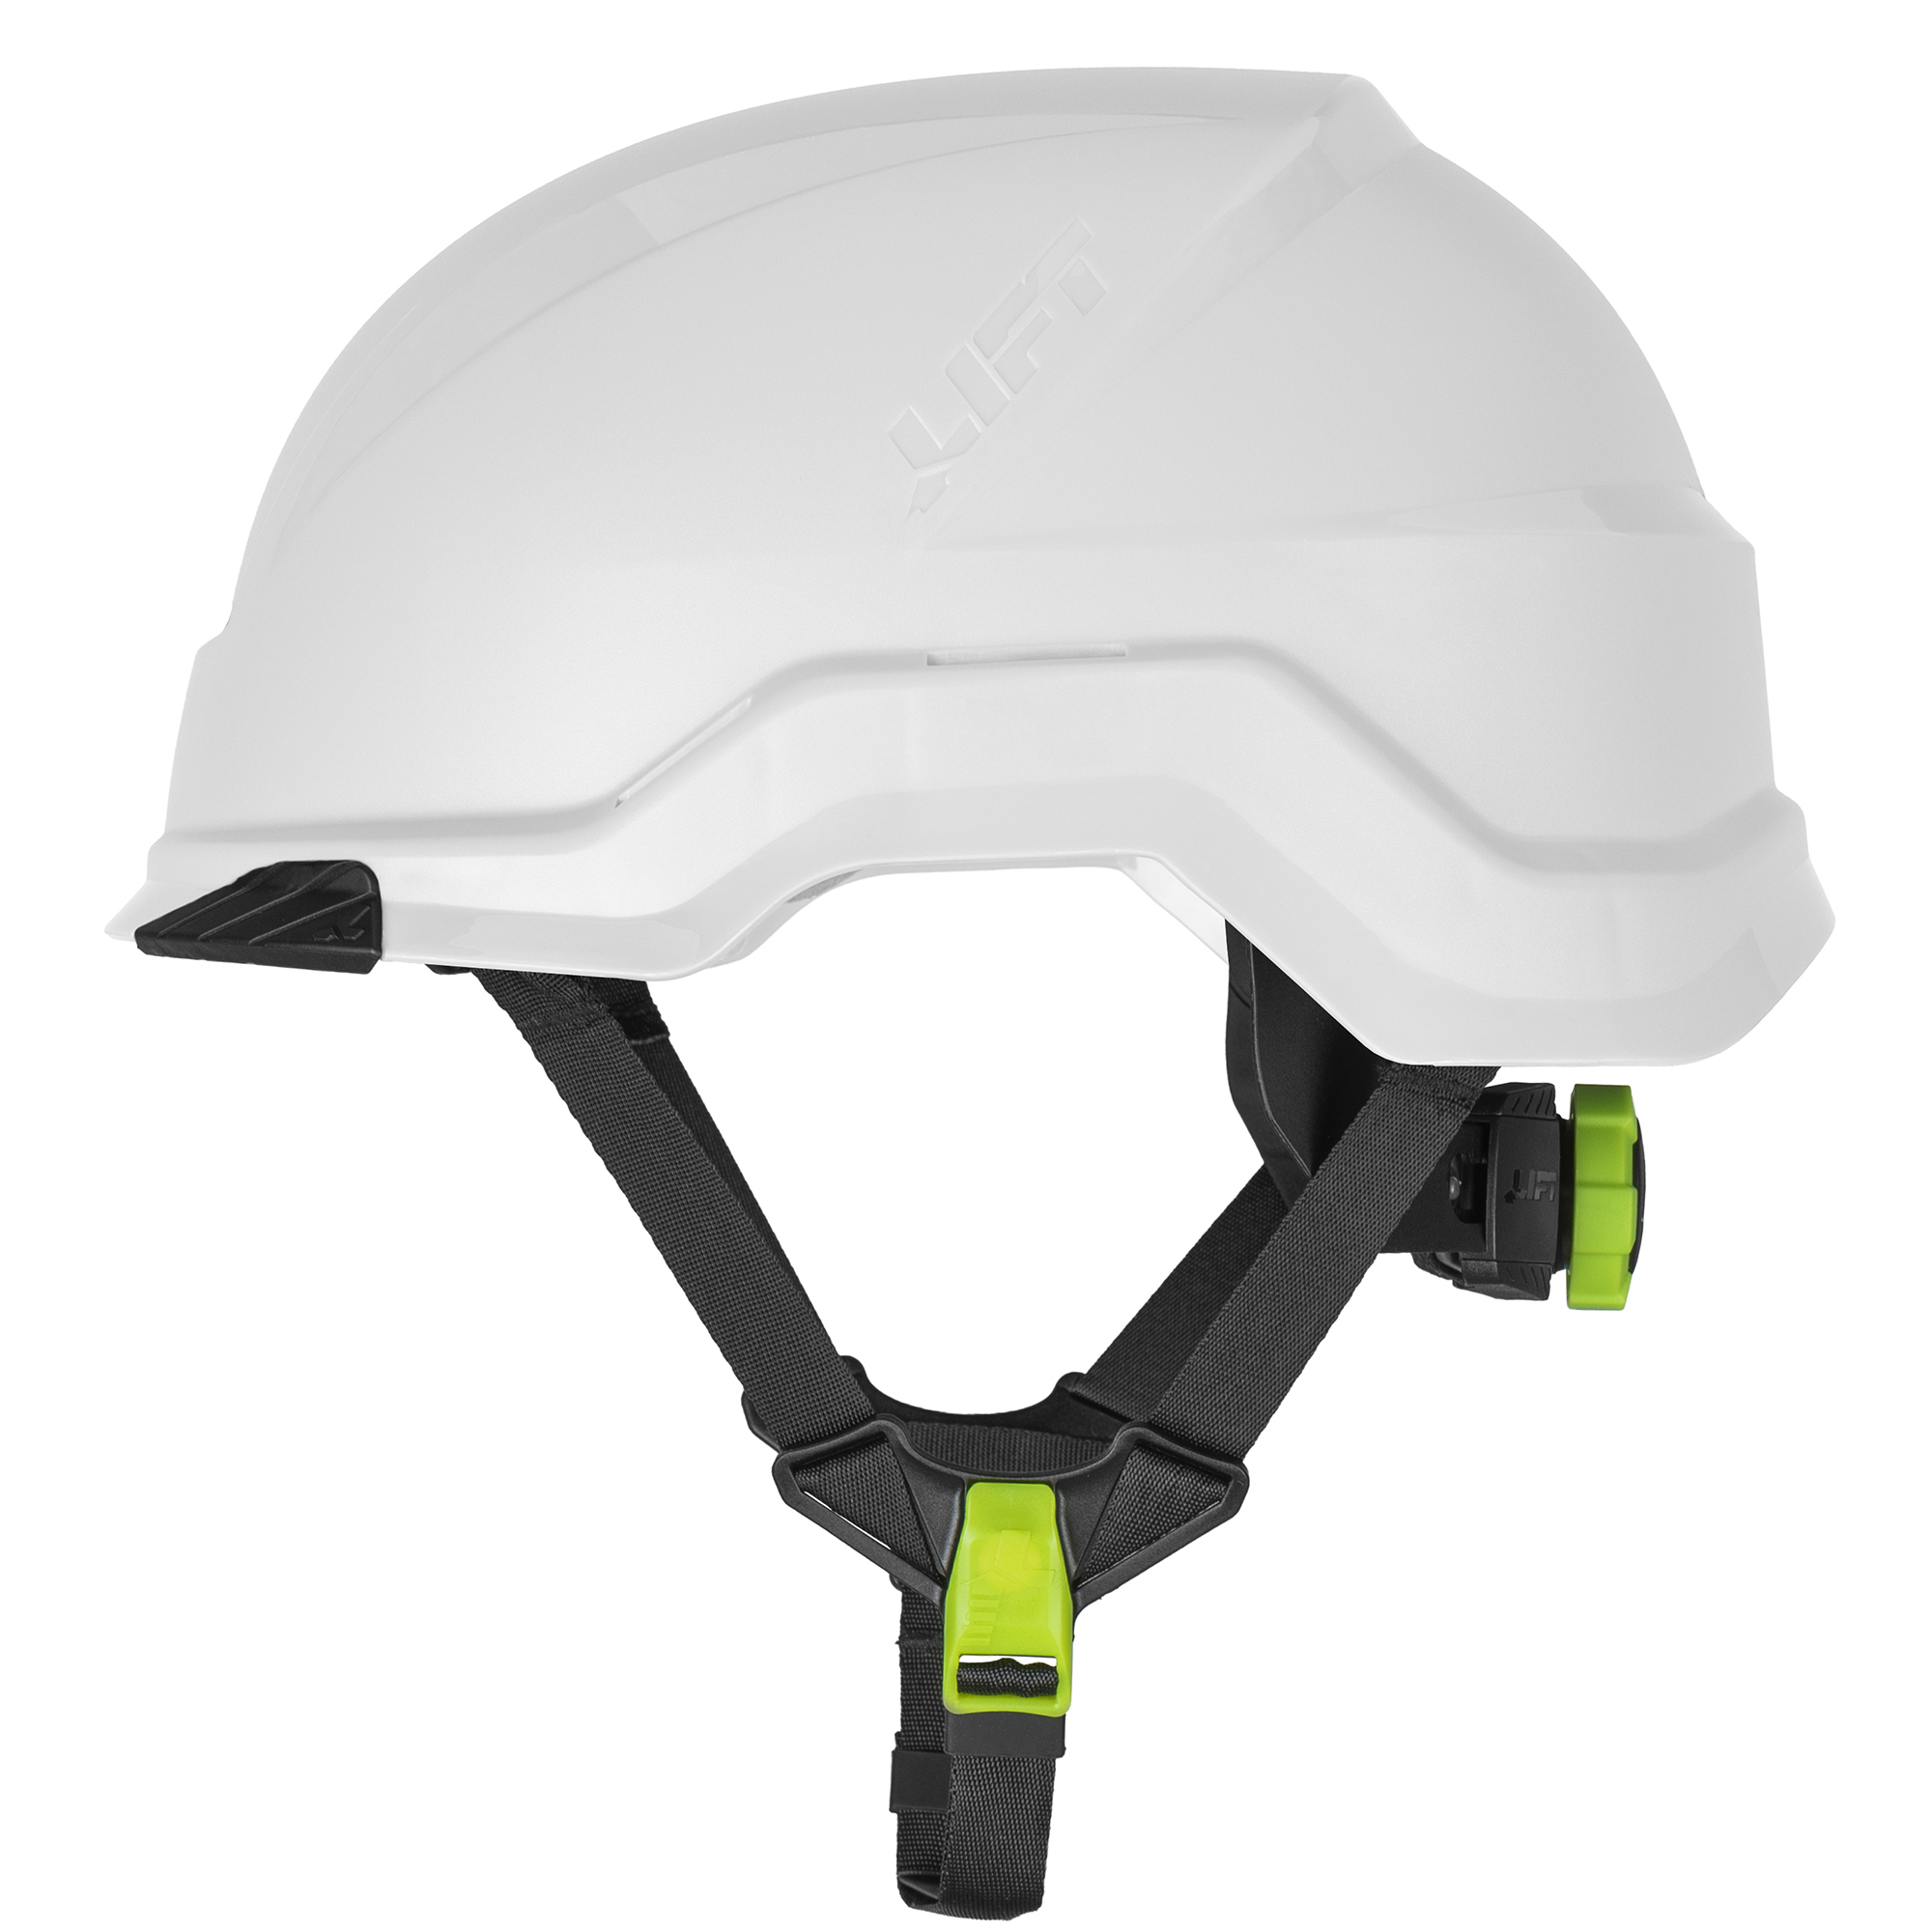 LIFT Safety, RADIX TYPE 2 NON-VENTED (White), Hard Hat Style Helmet, Hat Size Adjustable, Color White, Model HRX-22WE2